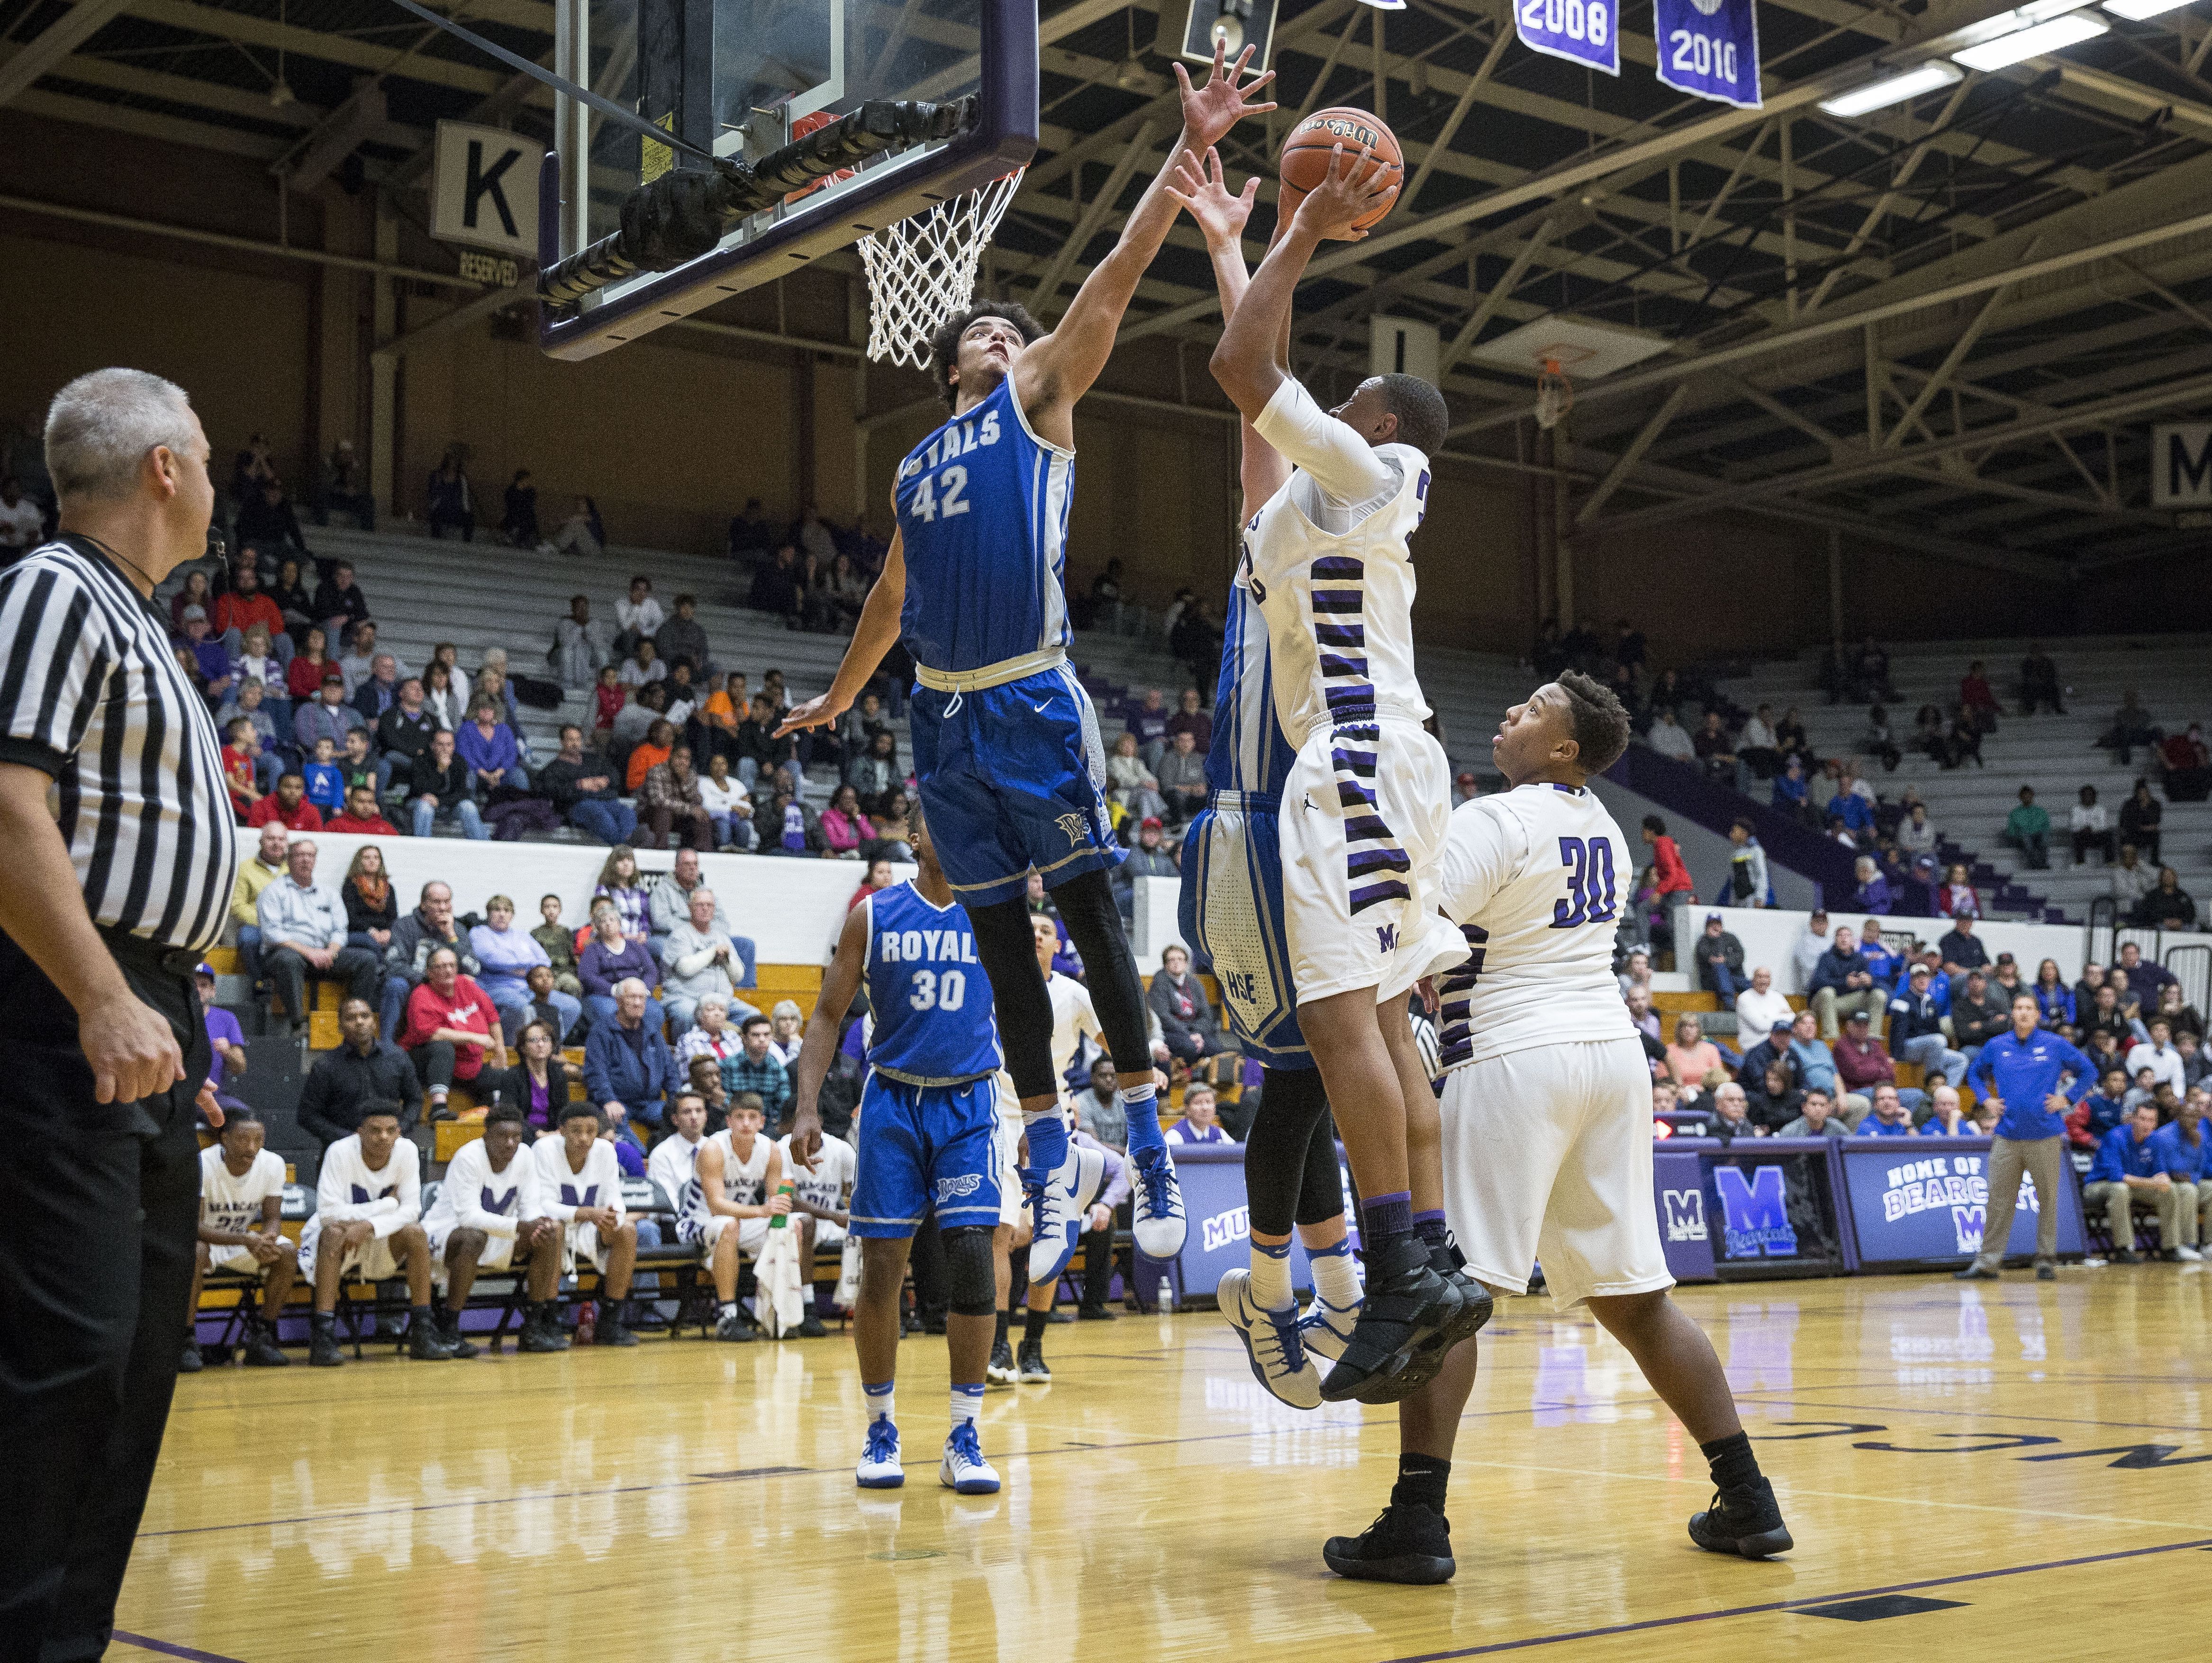 Hamilton Southeastern beat Muncie Central 97-61 at home Tuesday night at Central's Fieldhouse.